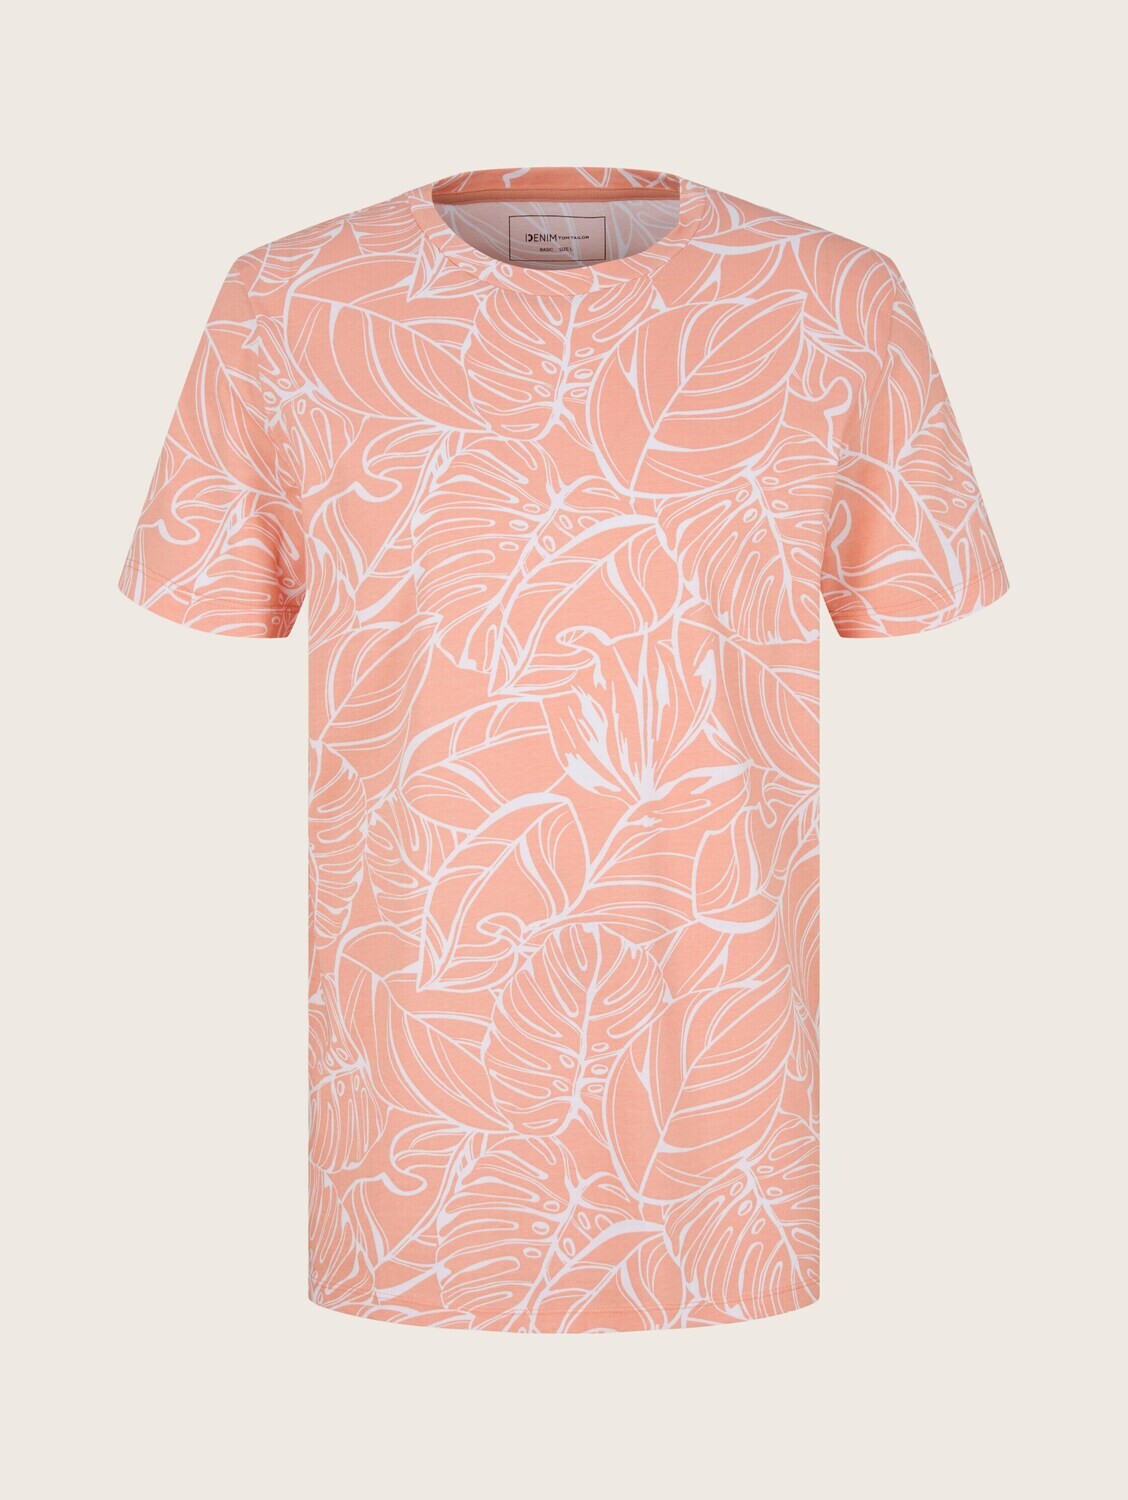 Tom Tailor t-shirt, coral white big leaves